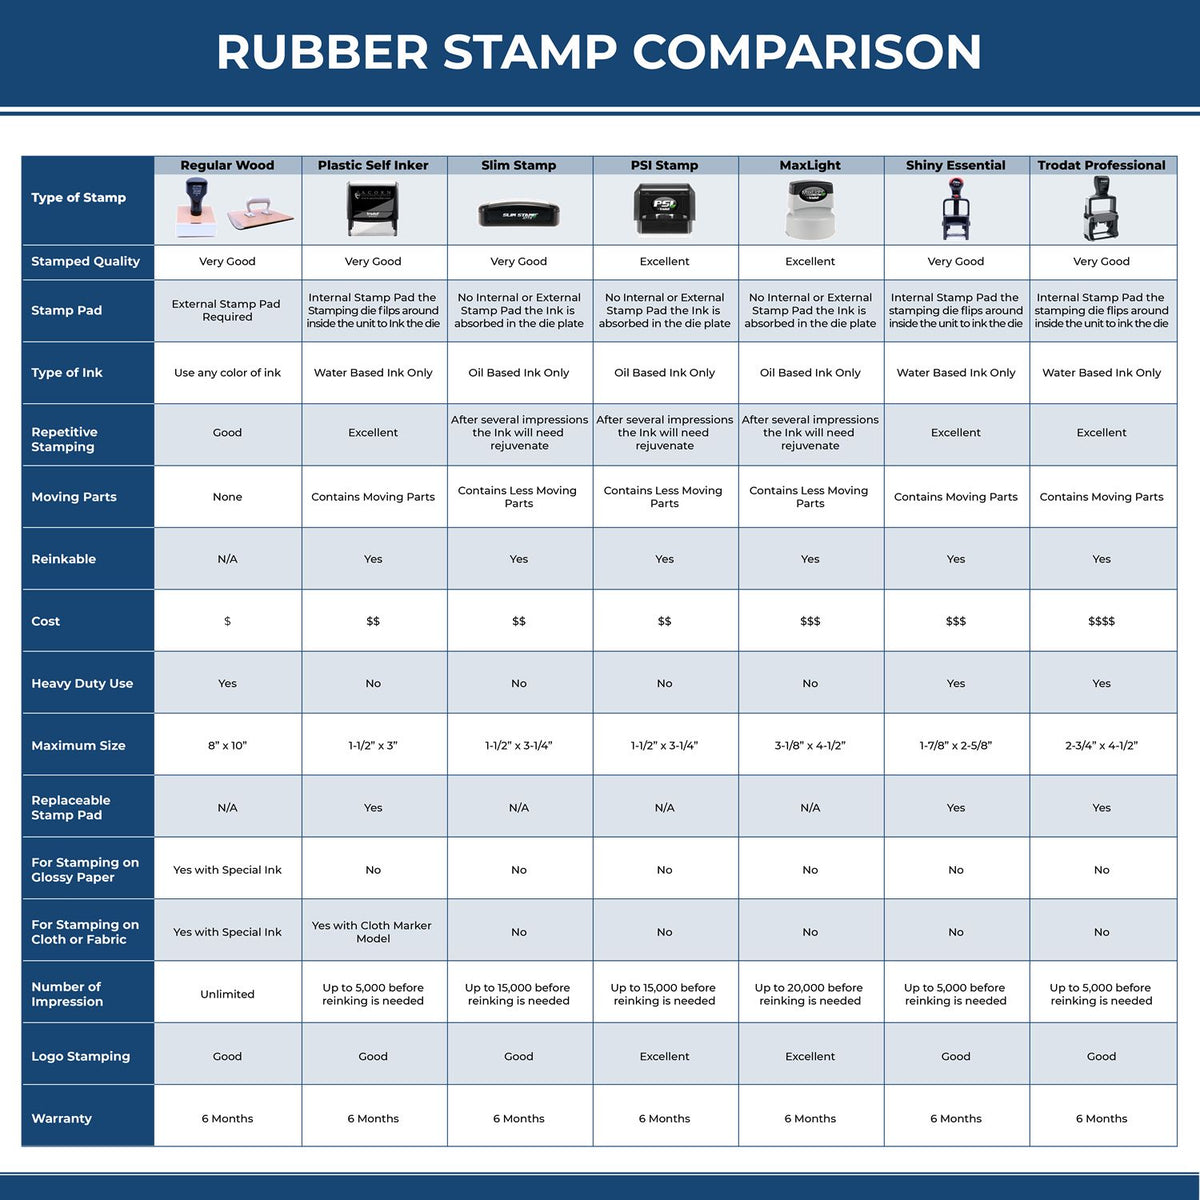 Large Self Inking Promoted Stamp 4650S Rubber Stamp Comparison